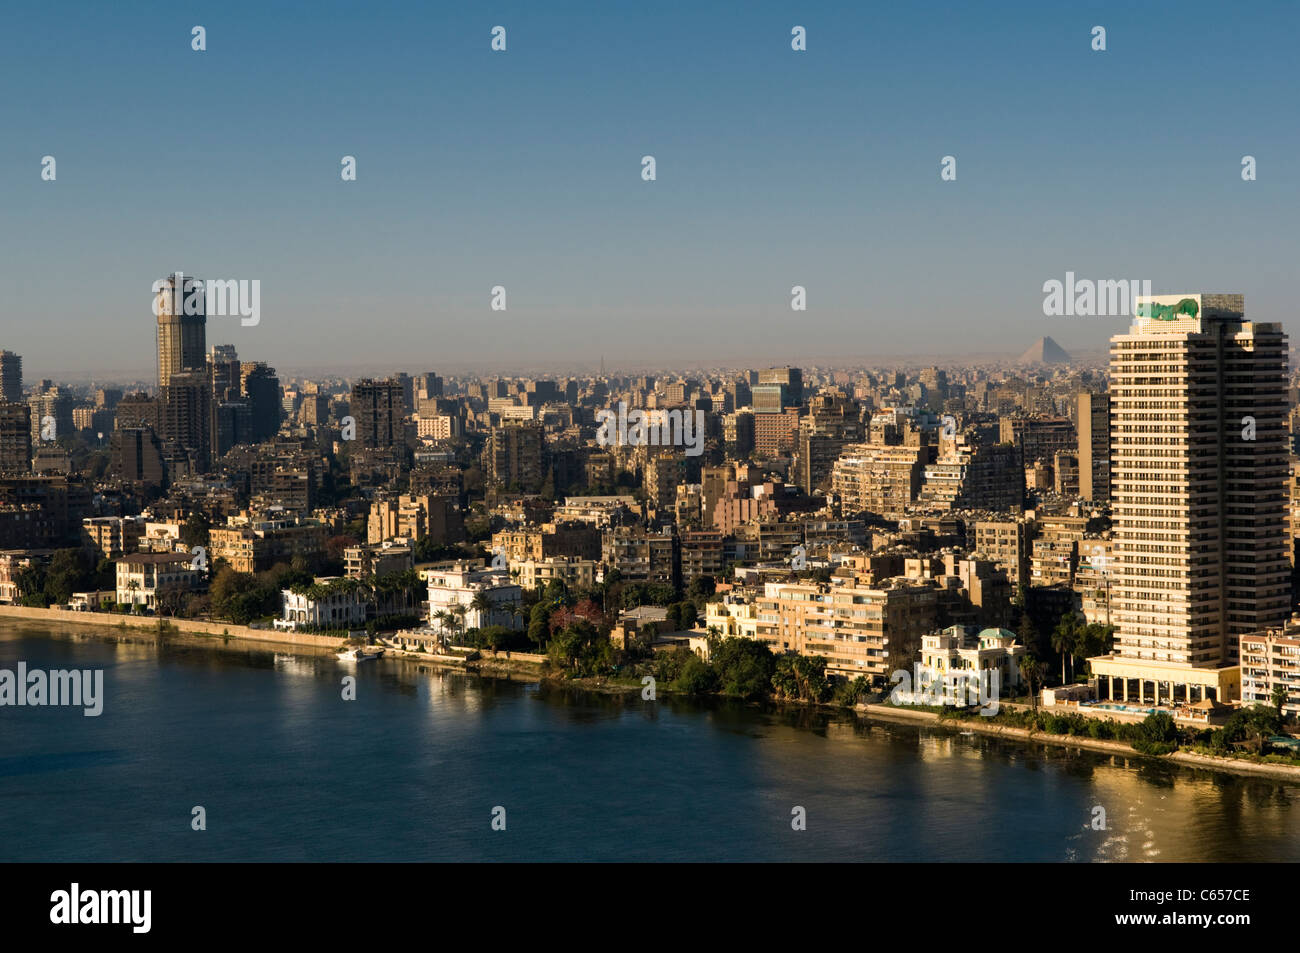 Nile River and cityscape of Cairo Egypt Stock Photo